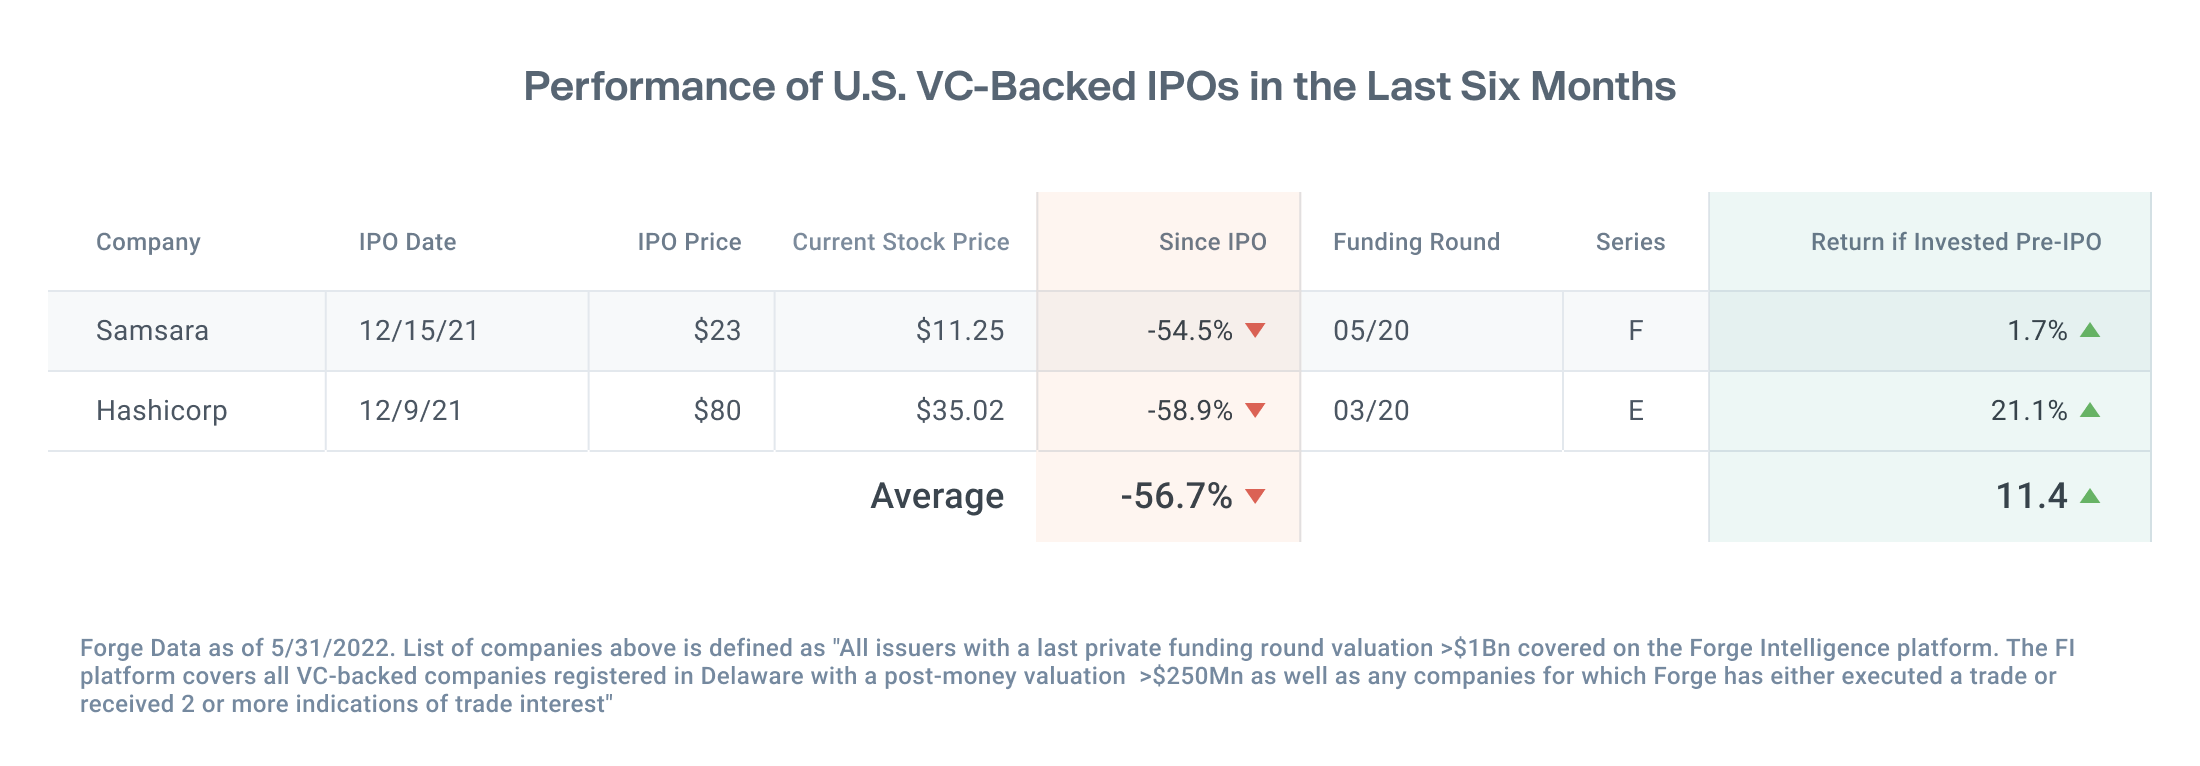 Forge data table showing performance of Samsara and Hashicorp IPOs in the last 6 months, current stock price vs IPO price